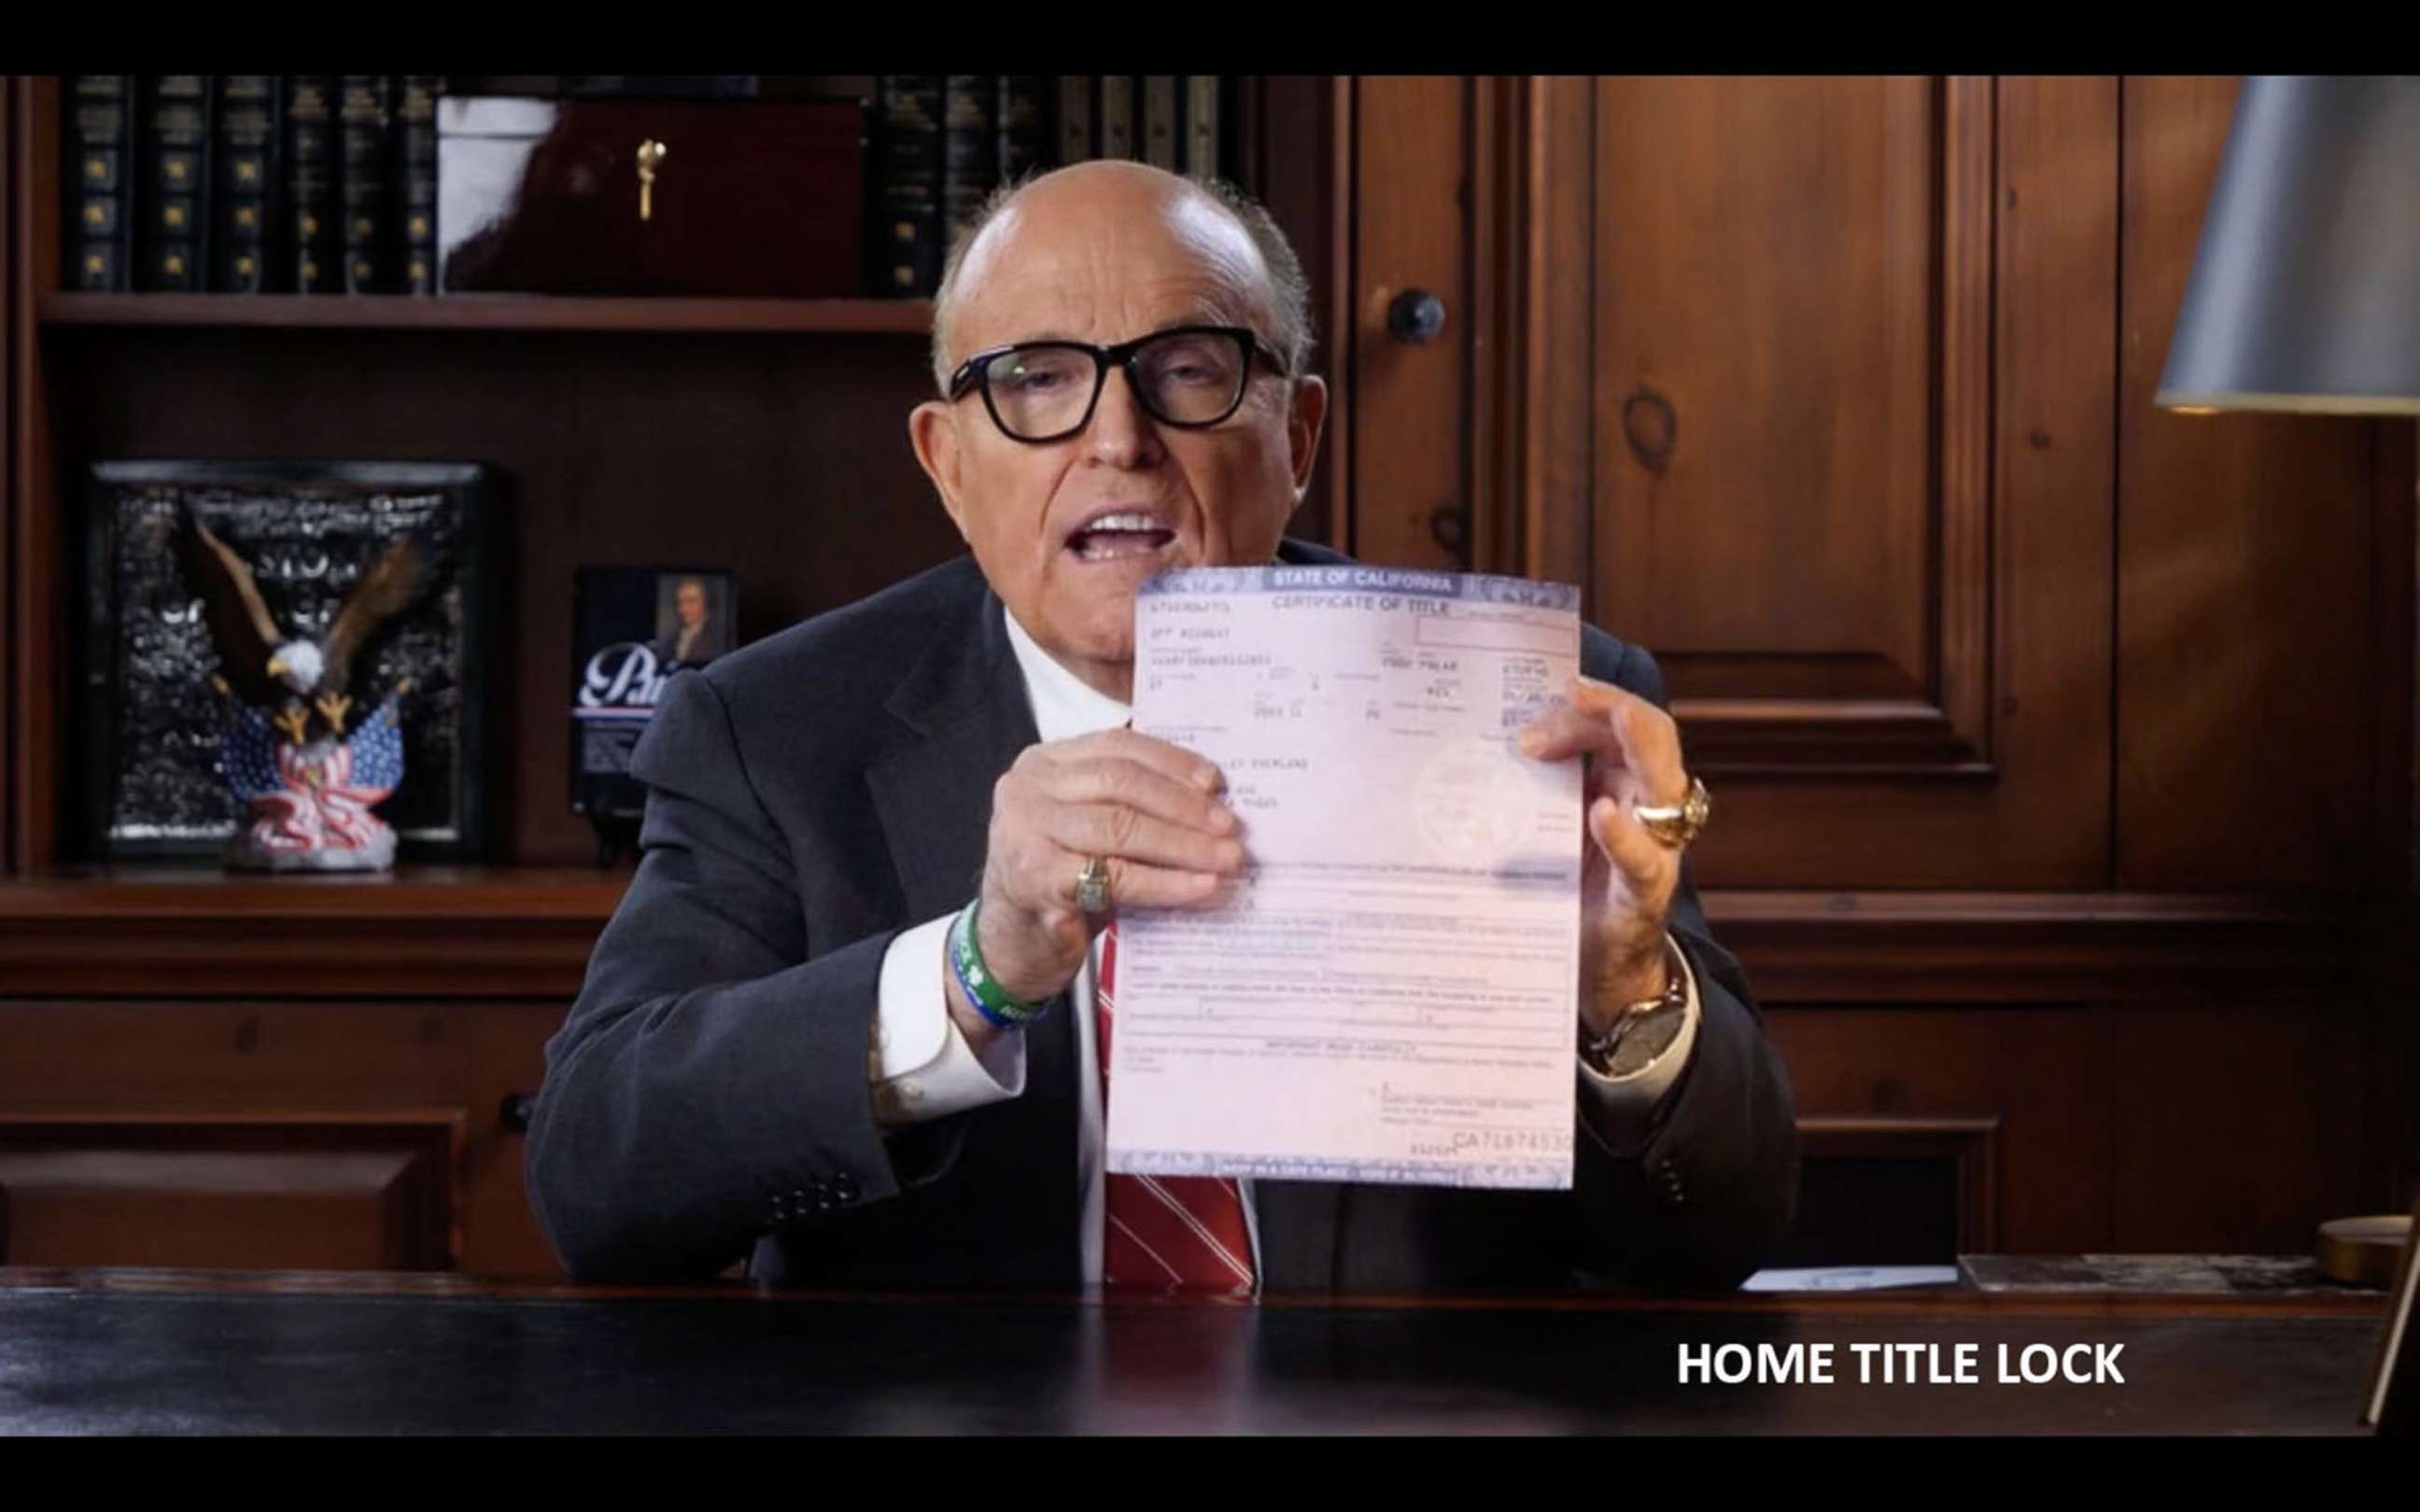 PHOTO: In an ad for Home Title Lock, Rudy Giuliani holds up what he describes as "a legal title to a home in California."